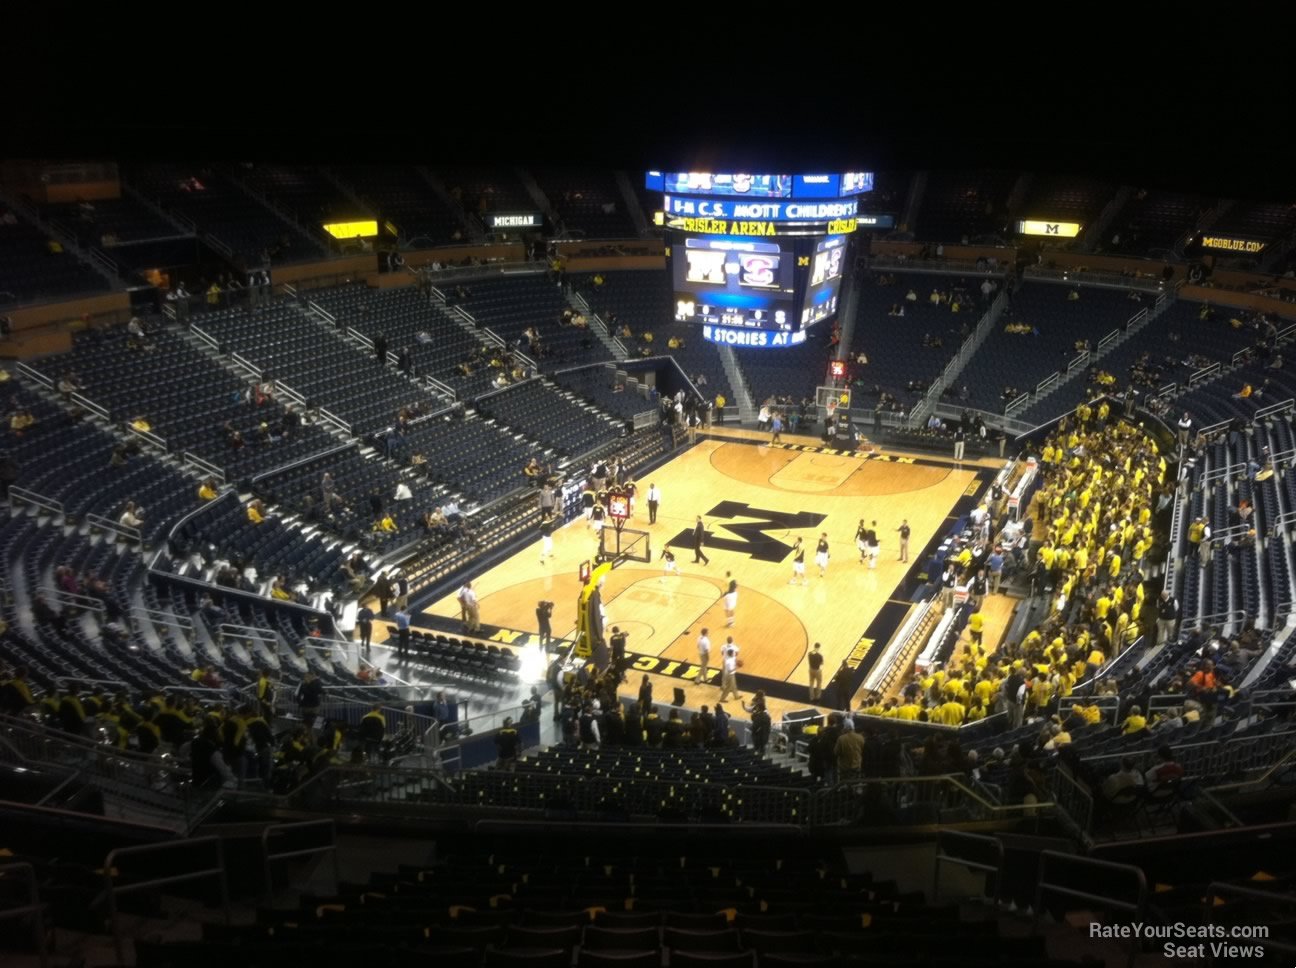 section 230, row 38 seat view  - crisler center